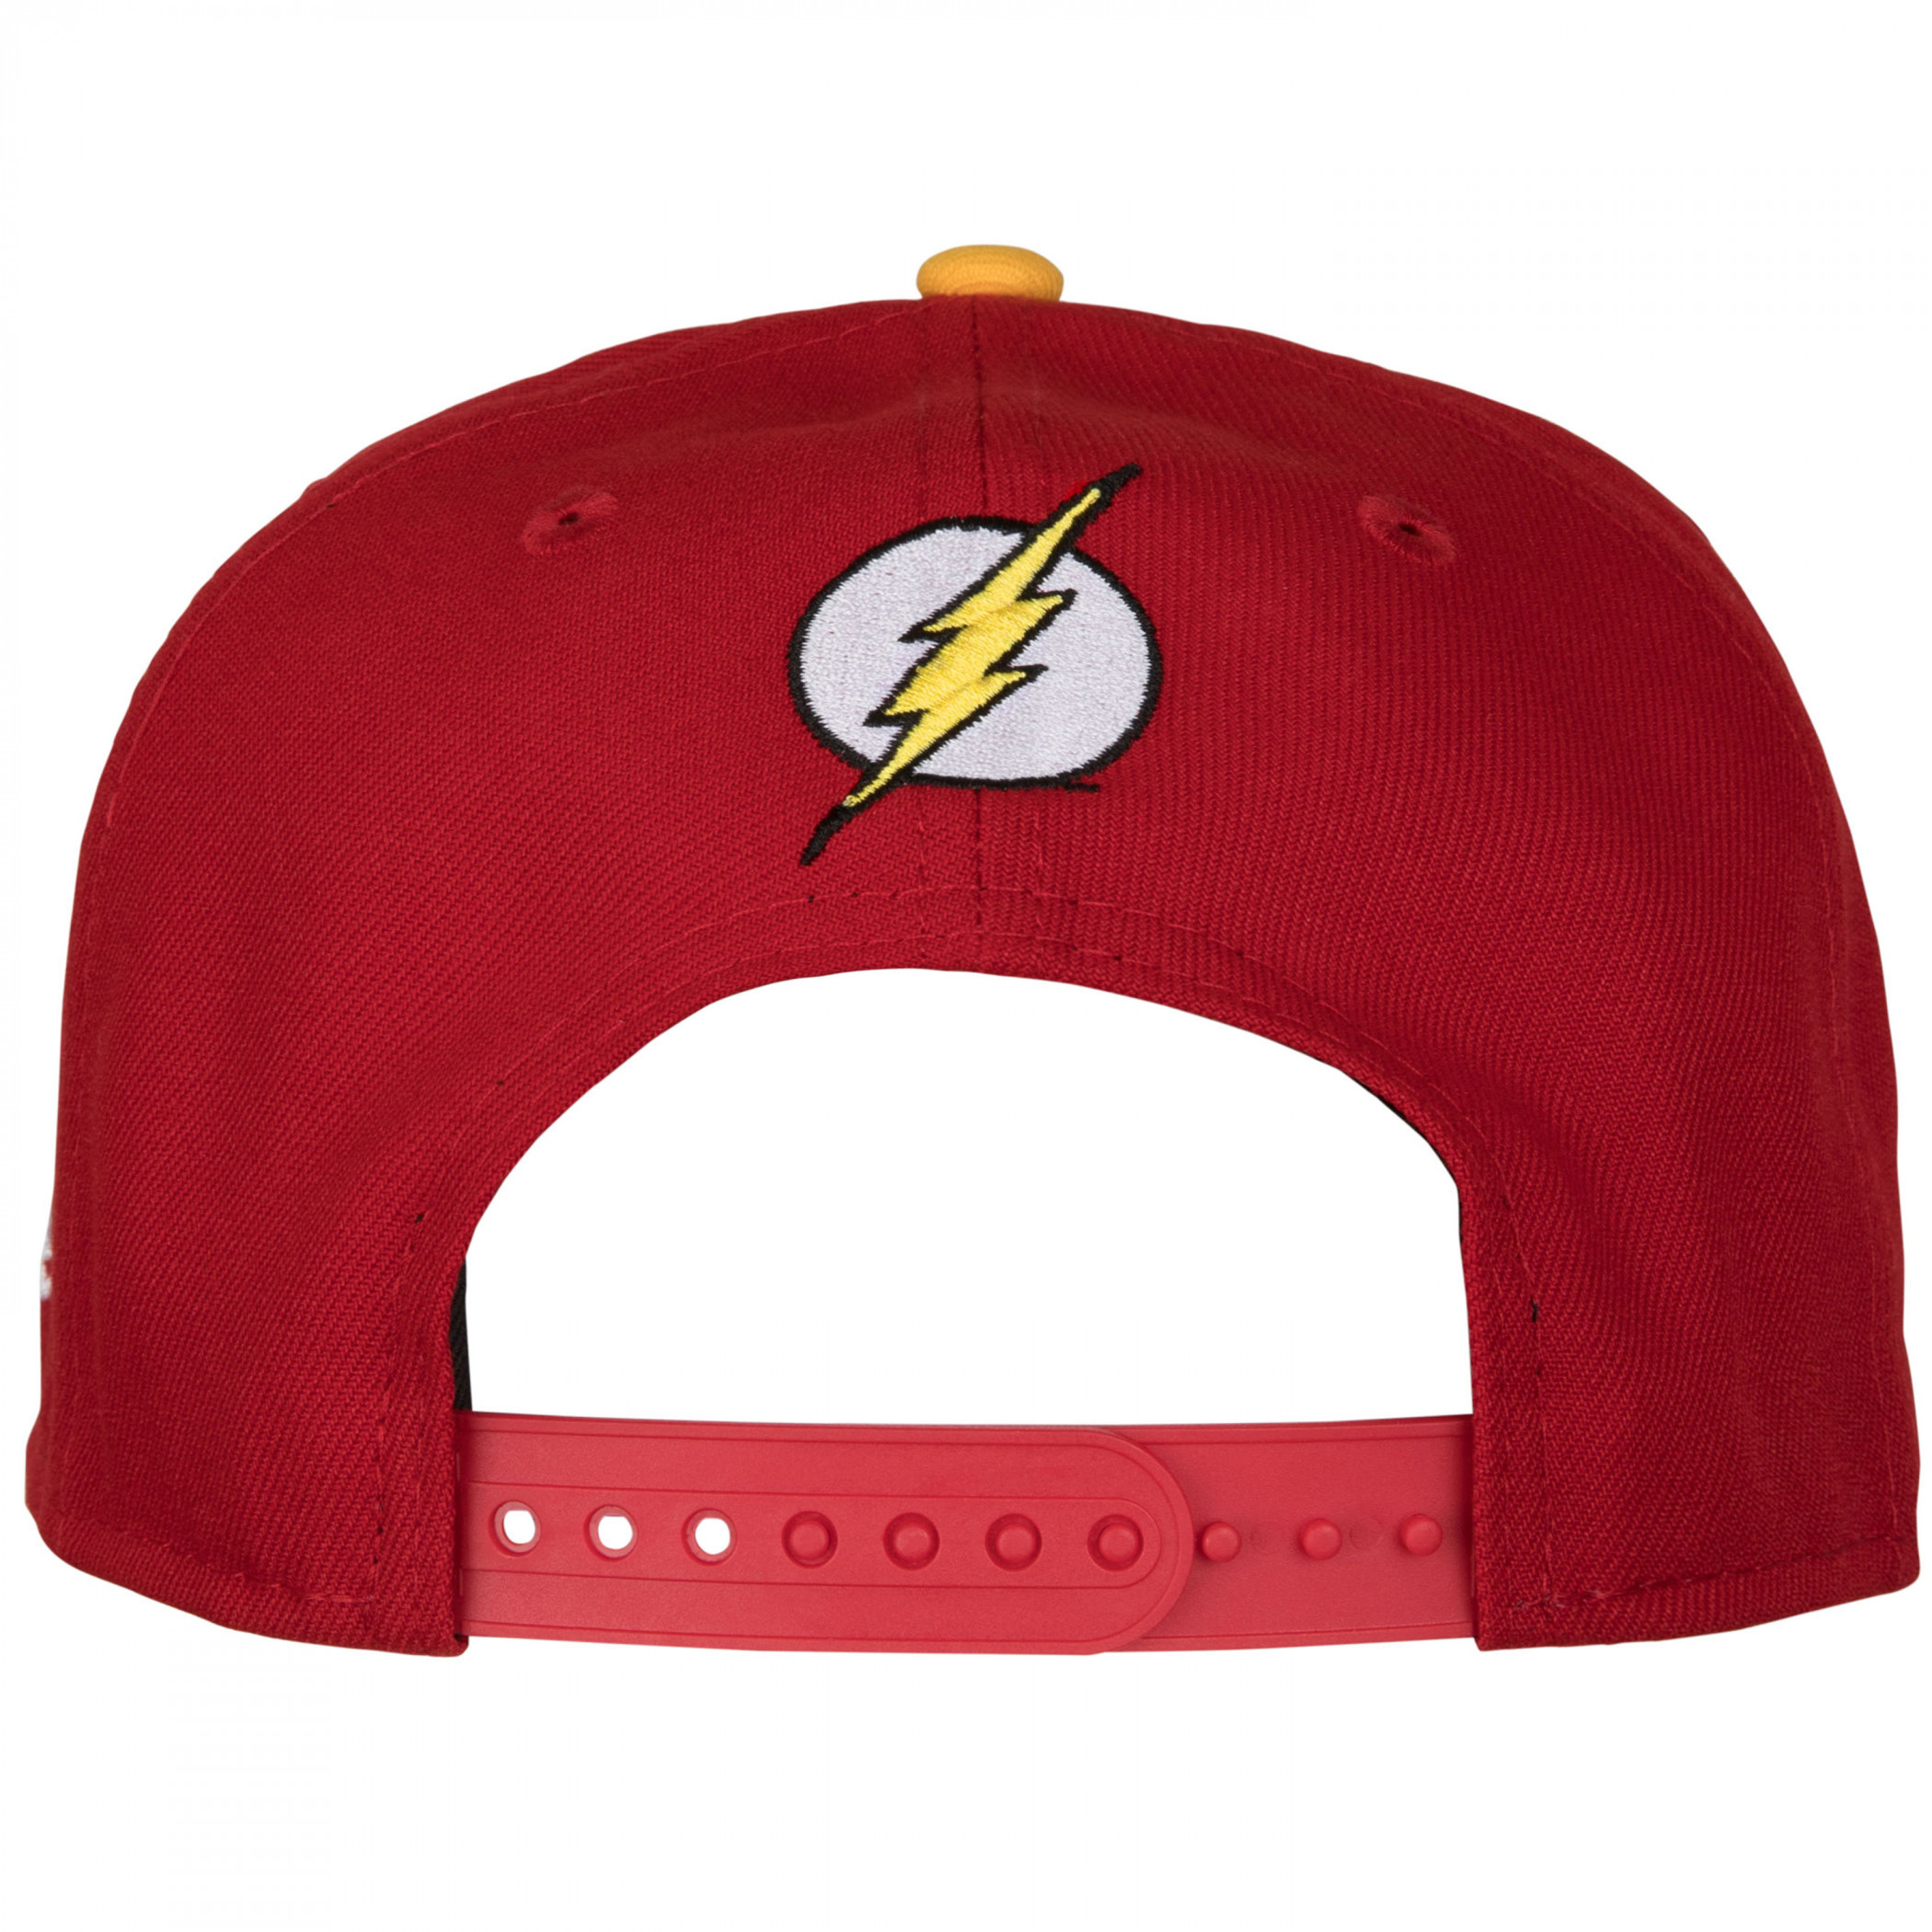 Flash Symbol Red and Yellow Colorway 9Fifty Adjustable Hat